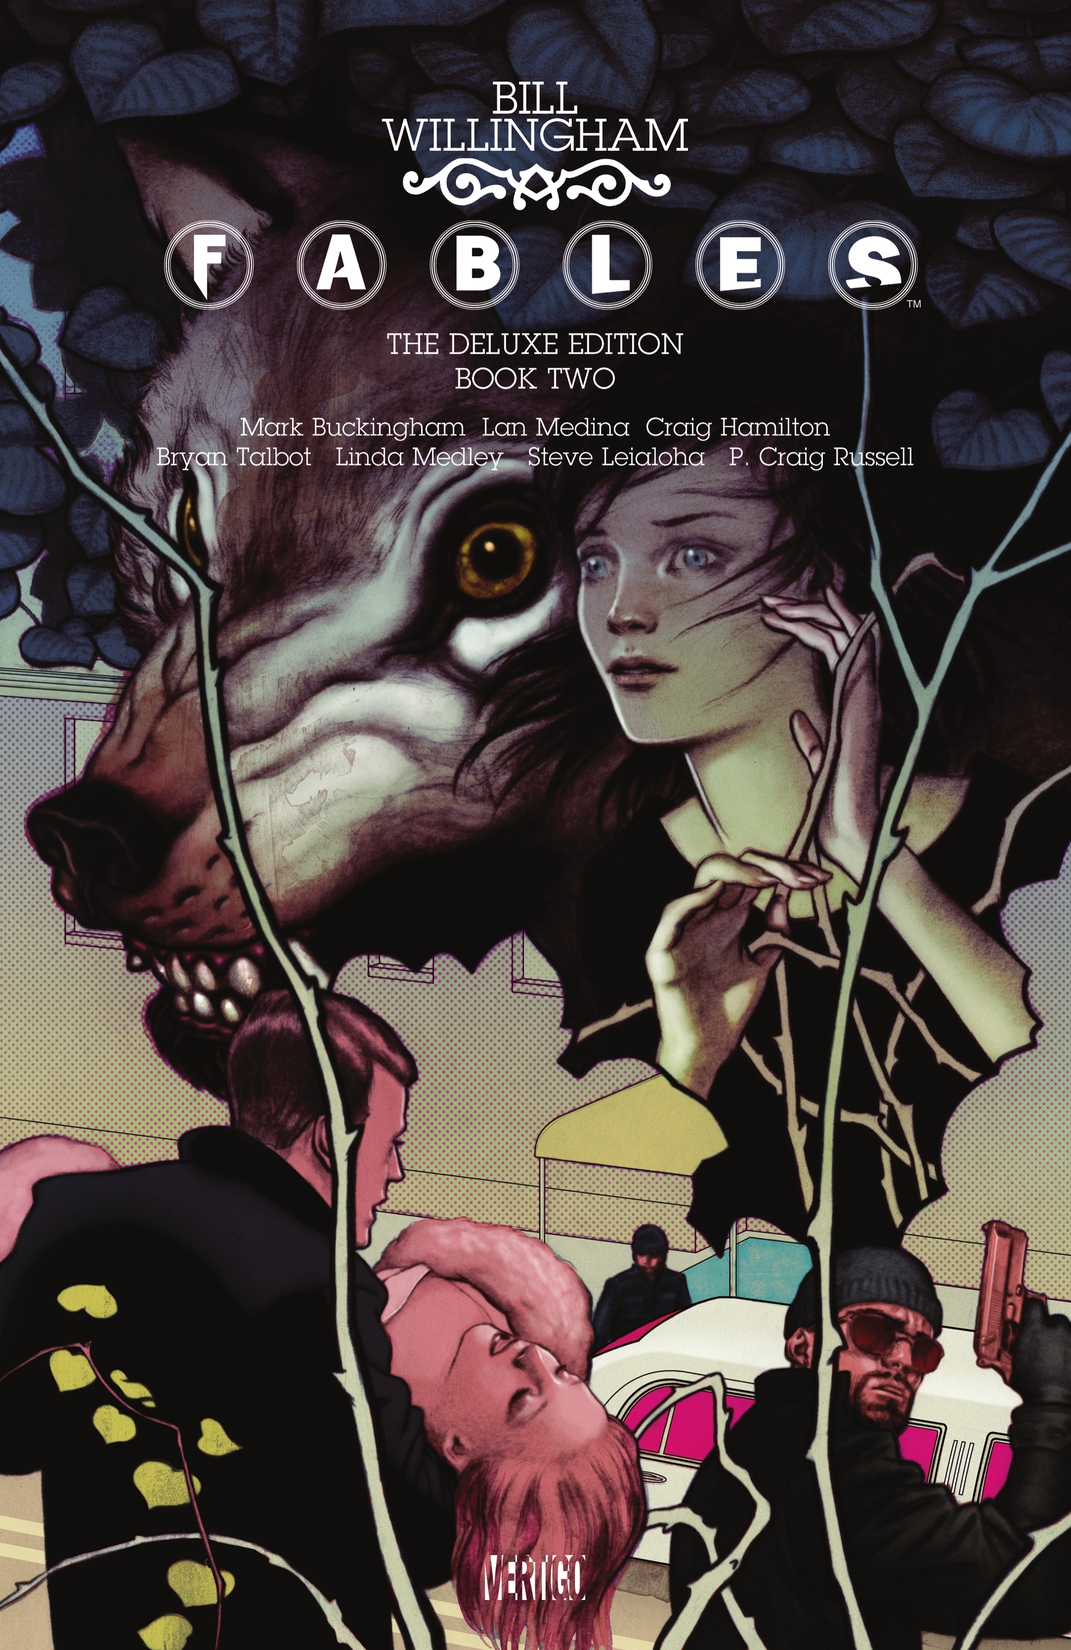 Fables: The Deluxe Edition Book Two preview images